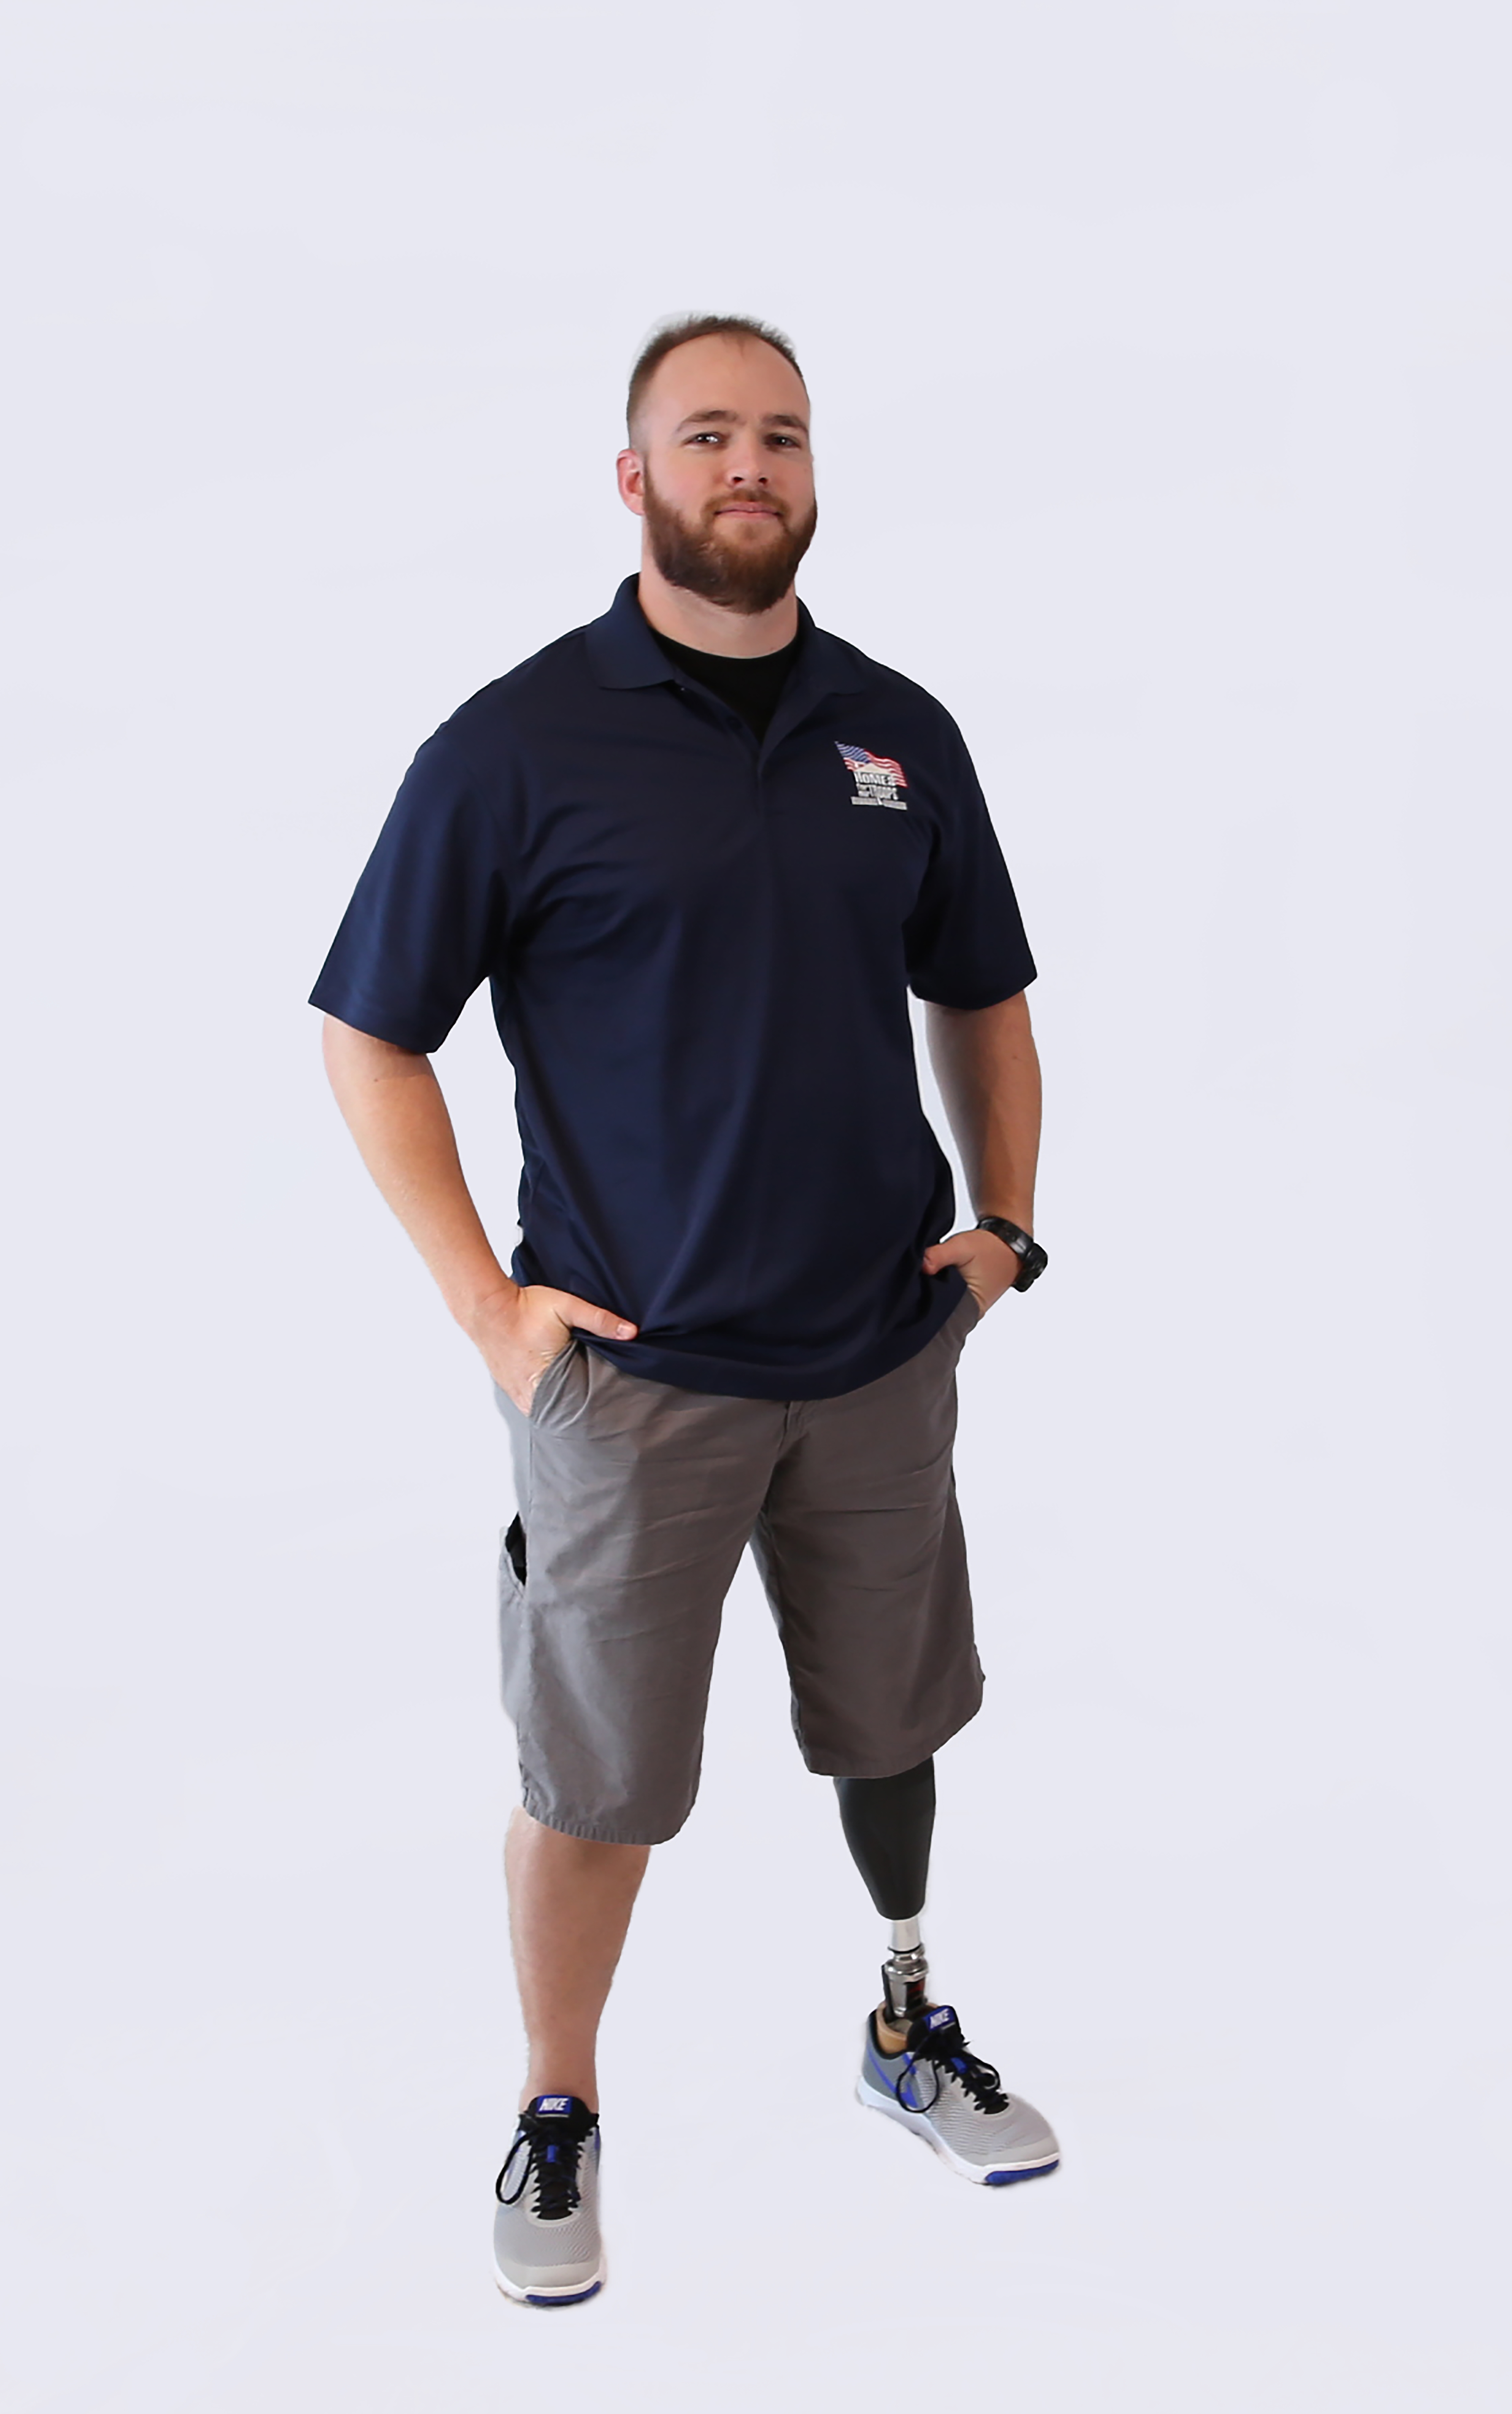 Army SGT Nathan Shumaker will receive Homes For Our Troops' 300th specially adapted custom home on Sept. 12, 2020. 